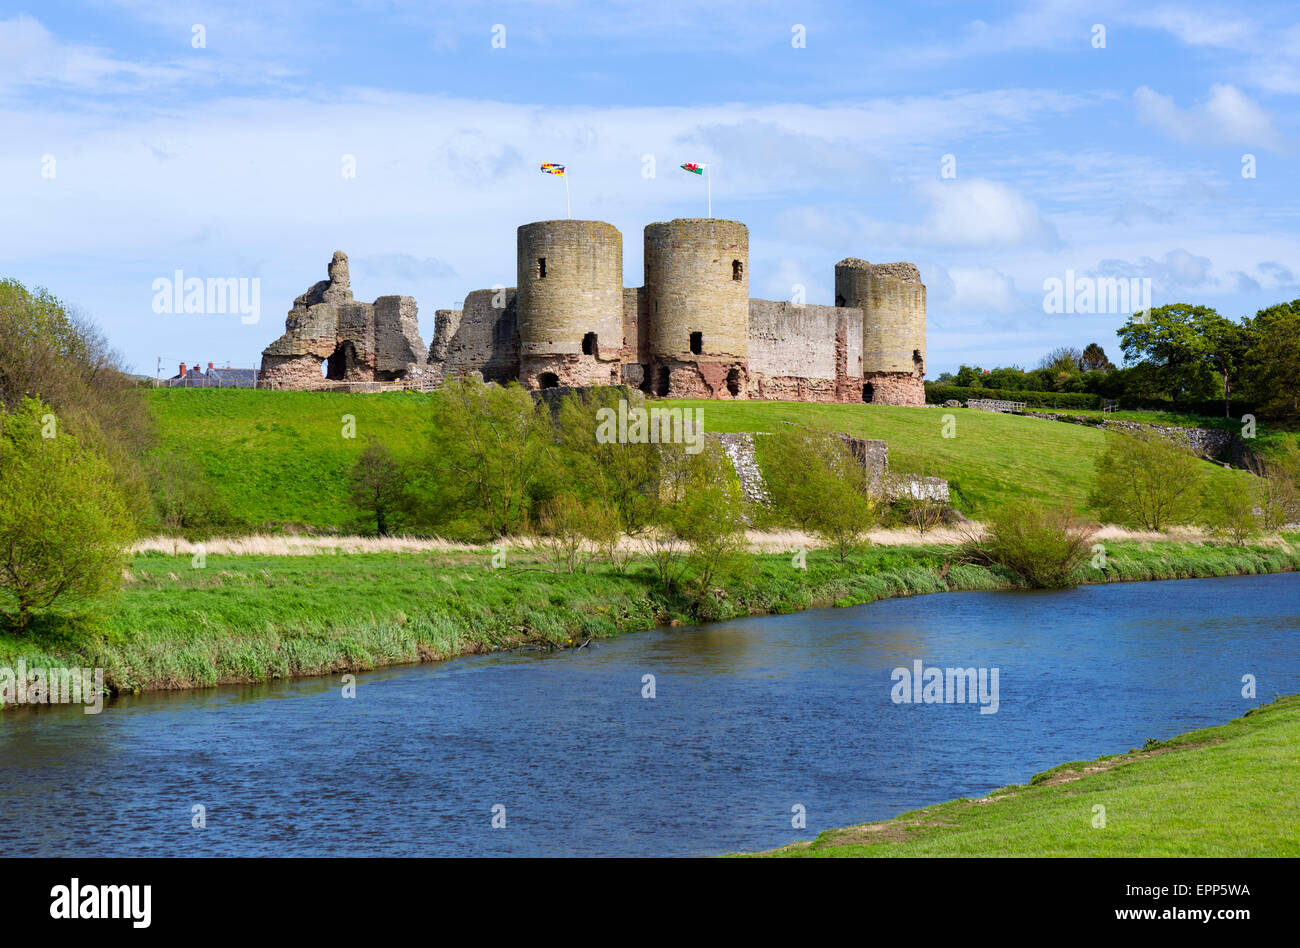 The ruins of Rhuddlan Castle on the River Clwyd, Rhuddlan, Denbighshire, Wales, UK Stock Photo